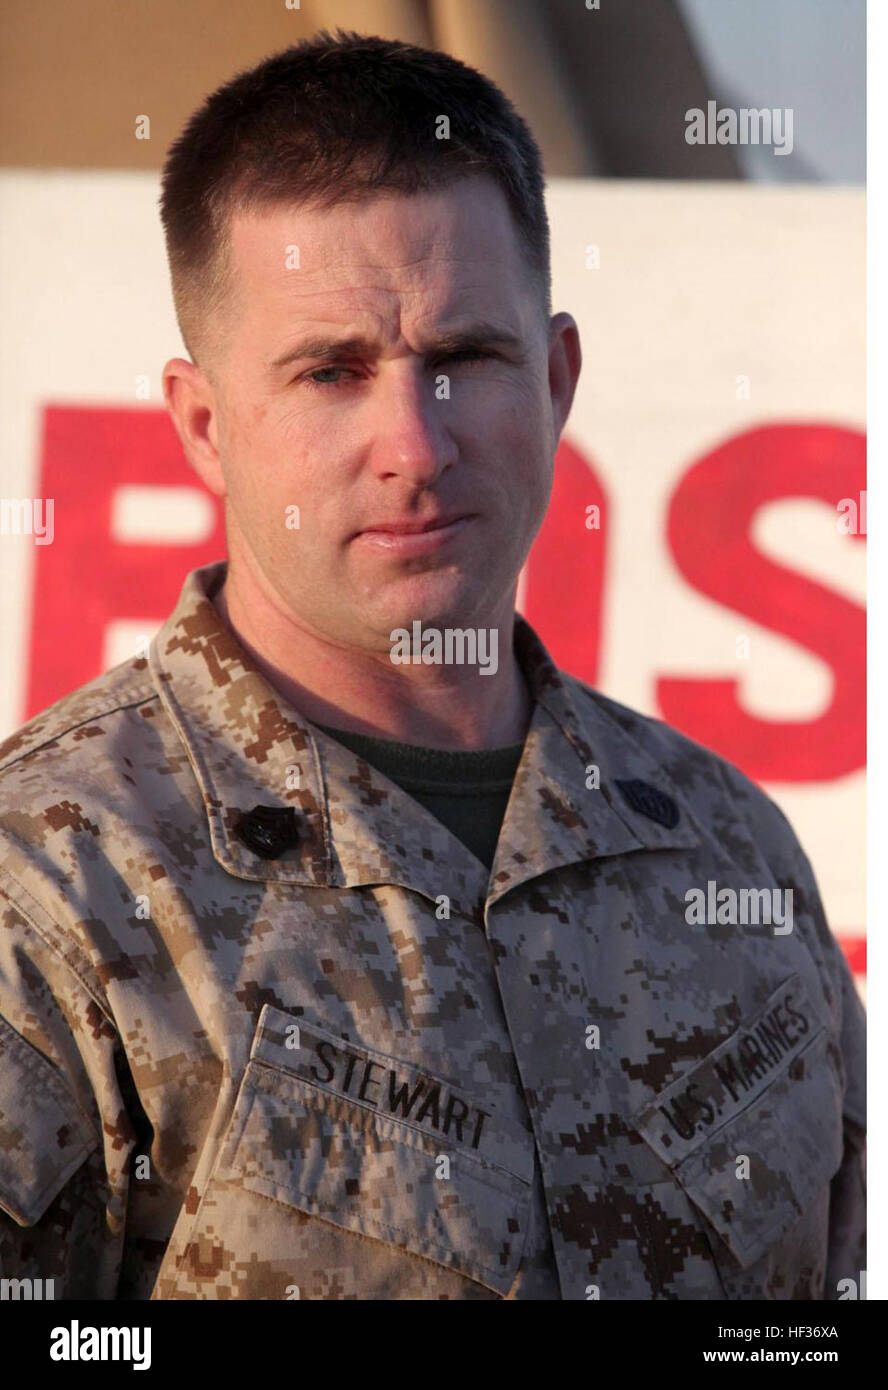 The Regimental Combat Team 6 Marine of the day is Gunnery Sgt. Mark Stewart, 34, camp commandant, from Fort Worth, Texas.   Stewart joined the Marine Corps in June 1997.  Stewart originally went to college with a full scholarship to Texas A&M for the sport of shooting. After the school took the money for the shooting team and rolled it into the women’s volleyball program, he went back home and decided to join the Marine Corps.  “Ever since I was a little kid I wanted to join the military. After I lost my scholarship it seemed like a good time to join,” Stewart laughed. “I’ve been here ever sin Stock Photo